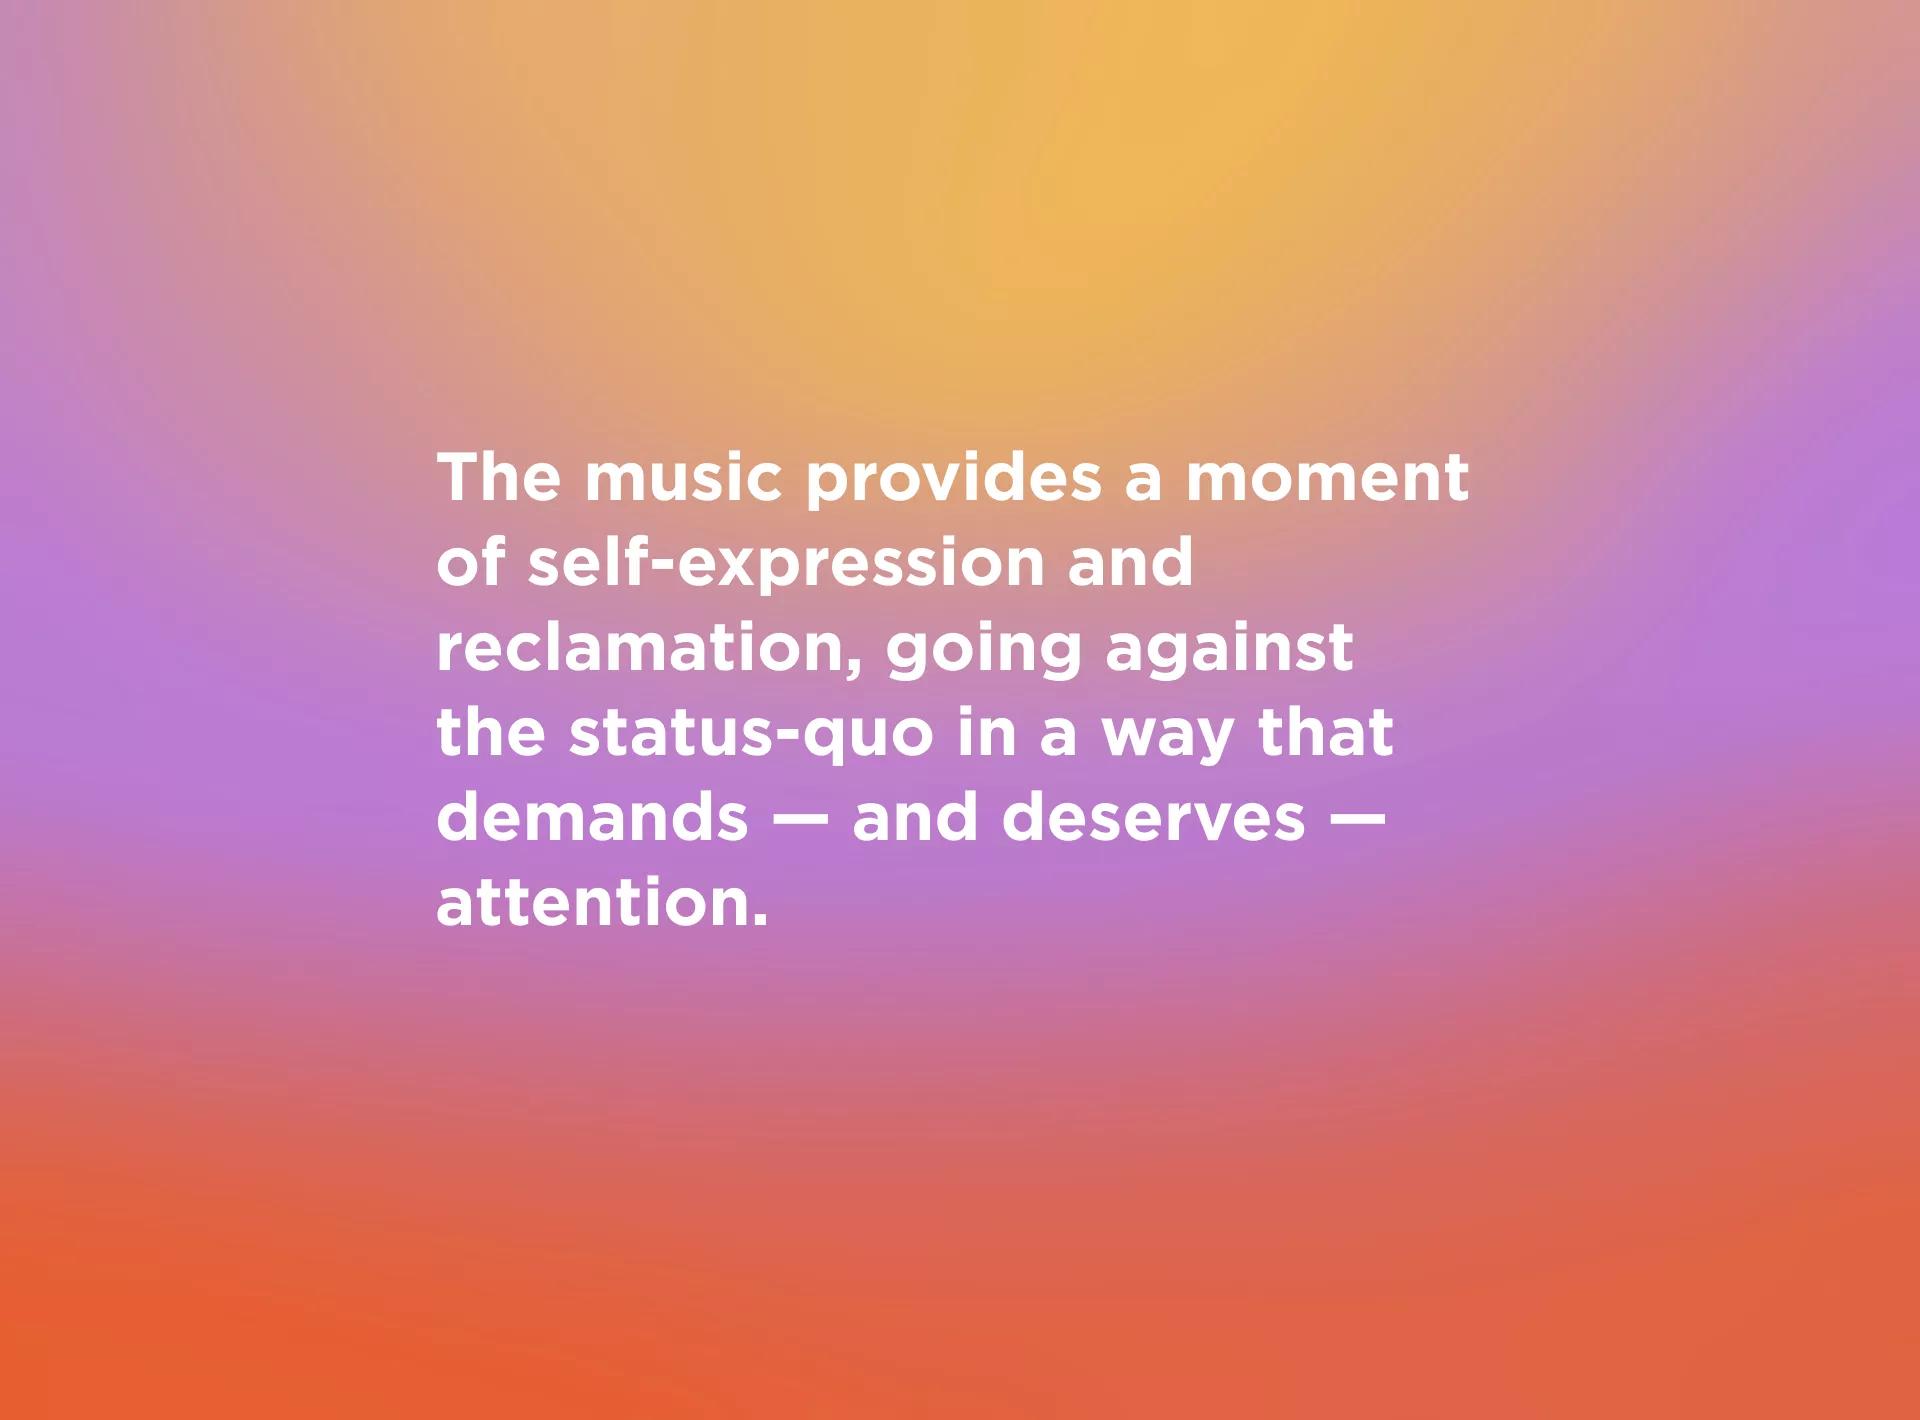 The music provides a moment of self-expression and reclamation, going against the status-quo in a way that — demands and deserves — attention.